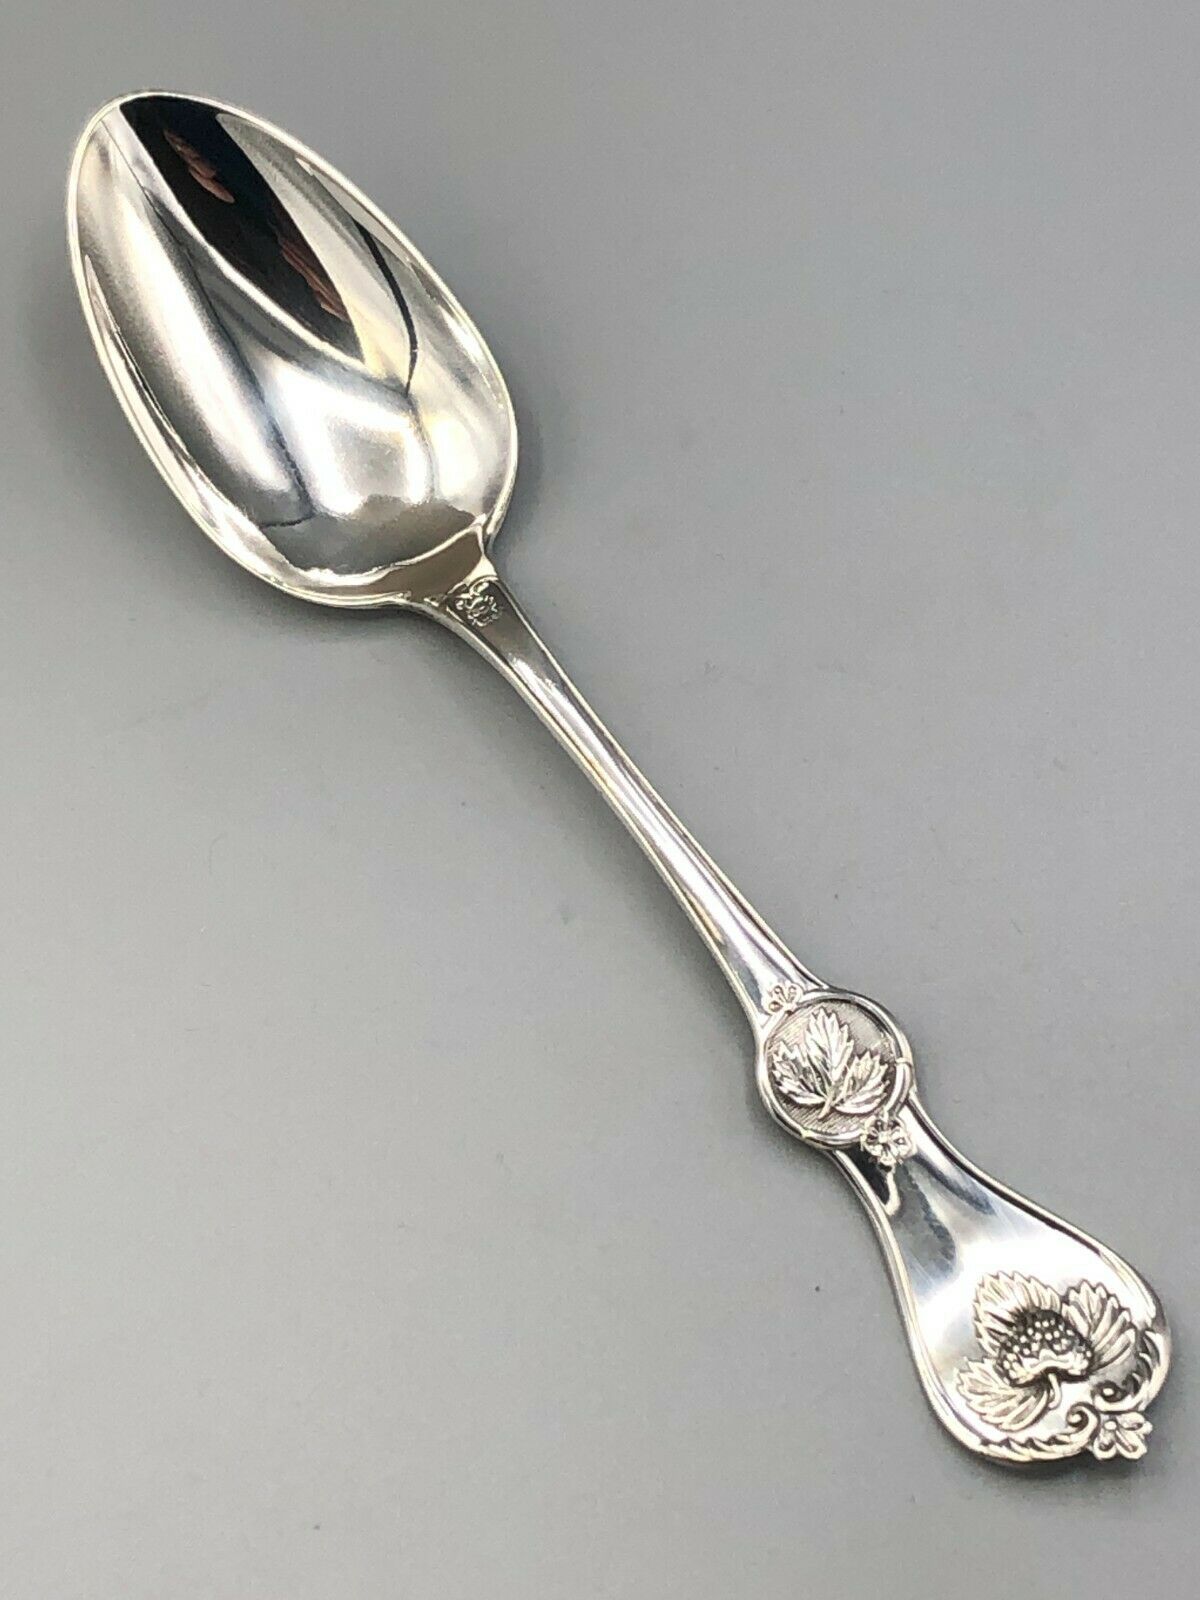 Beautiful Antique Coin Silver "blackberry" Soup Spoon By C.w. Dearing & Co